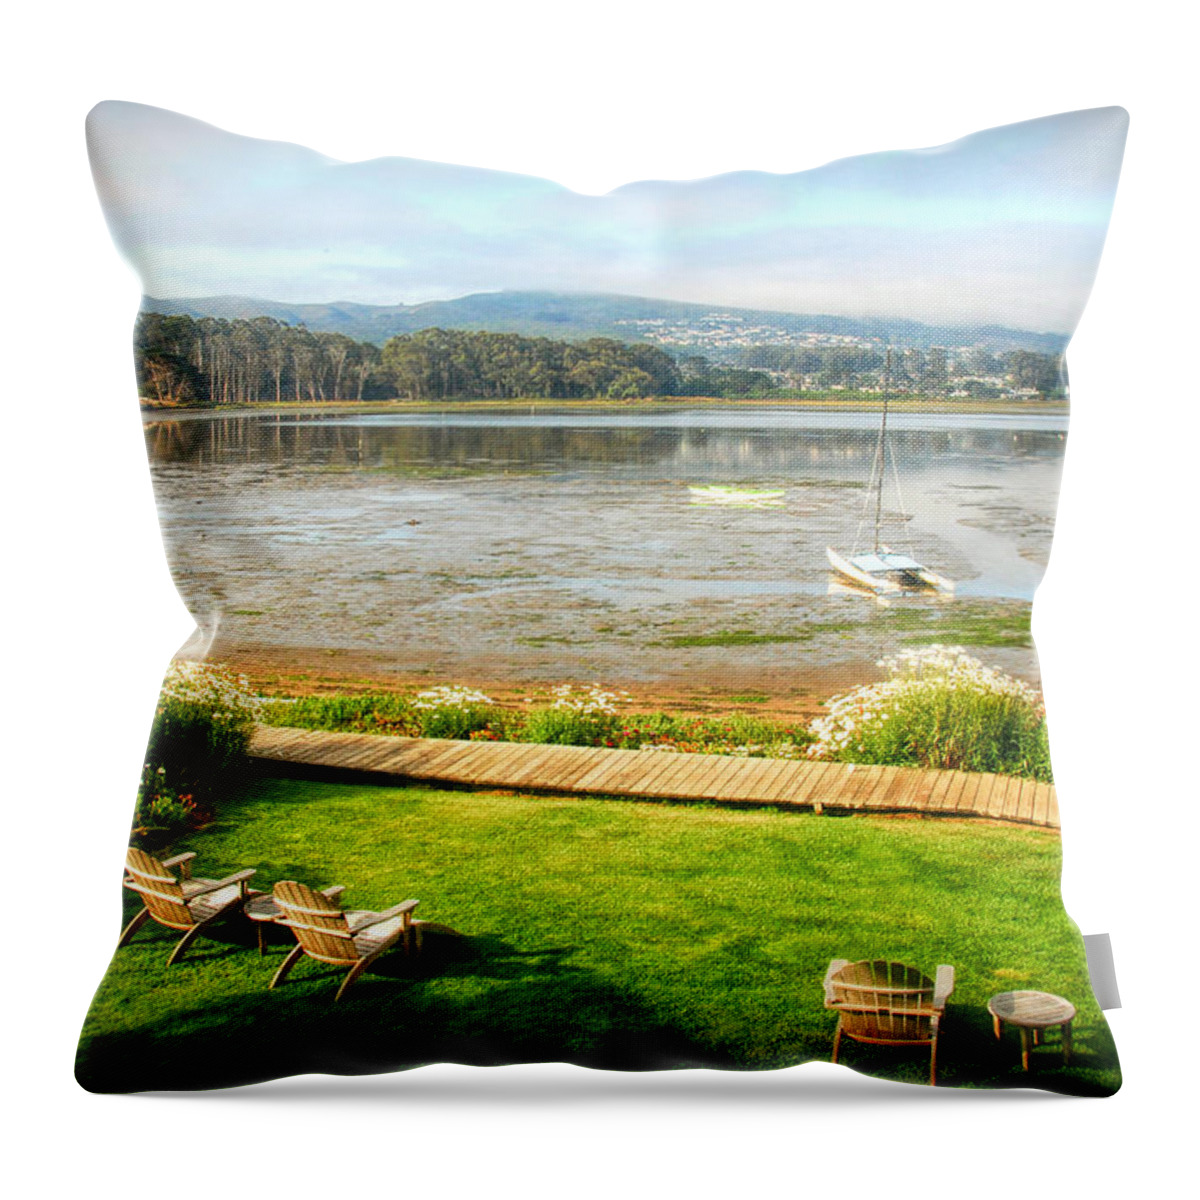 Back Bay In Throw Pillow featuring the photograph Window of the Back Bay Inn by Michael Hope